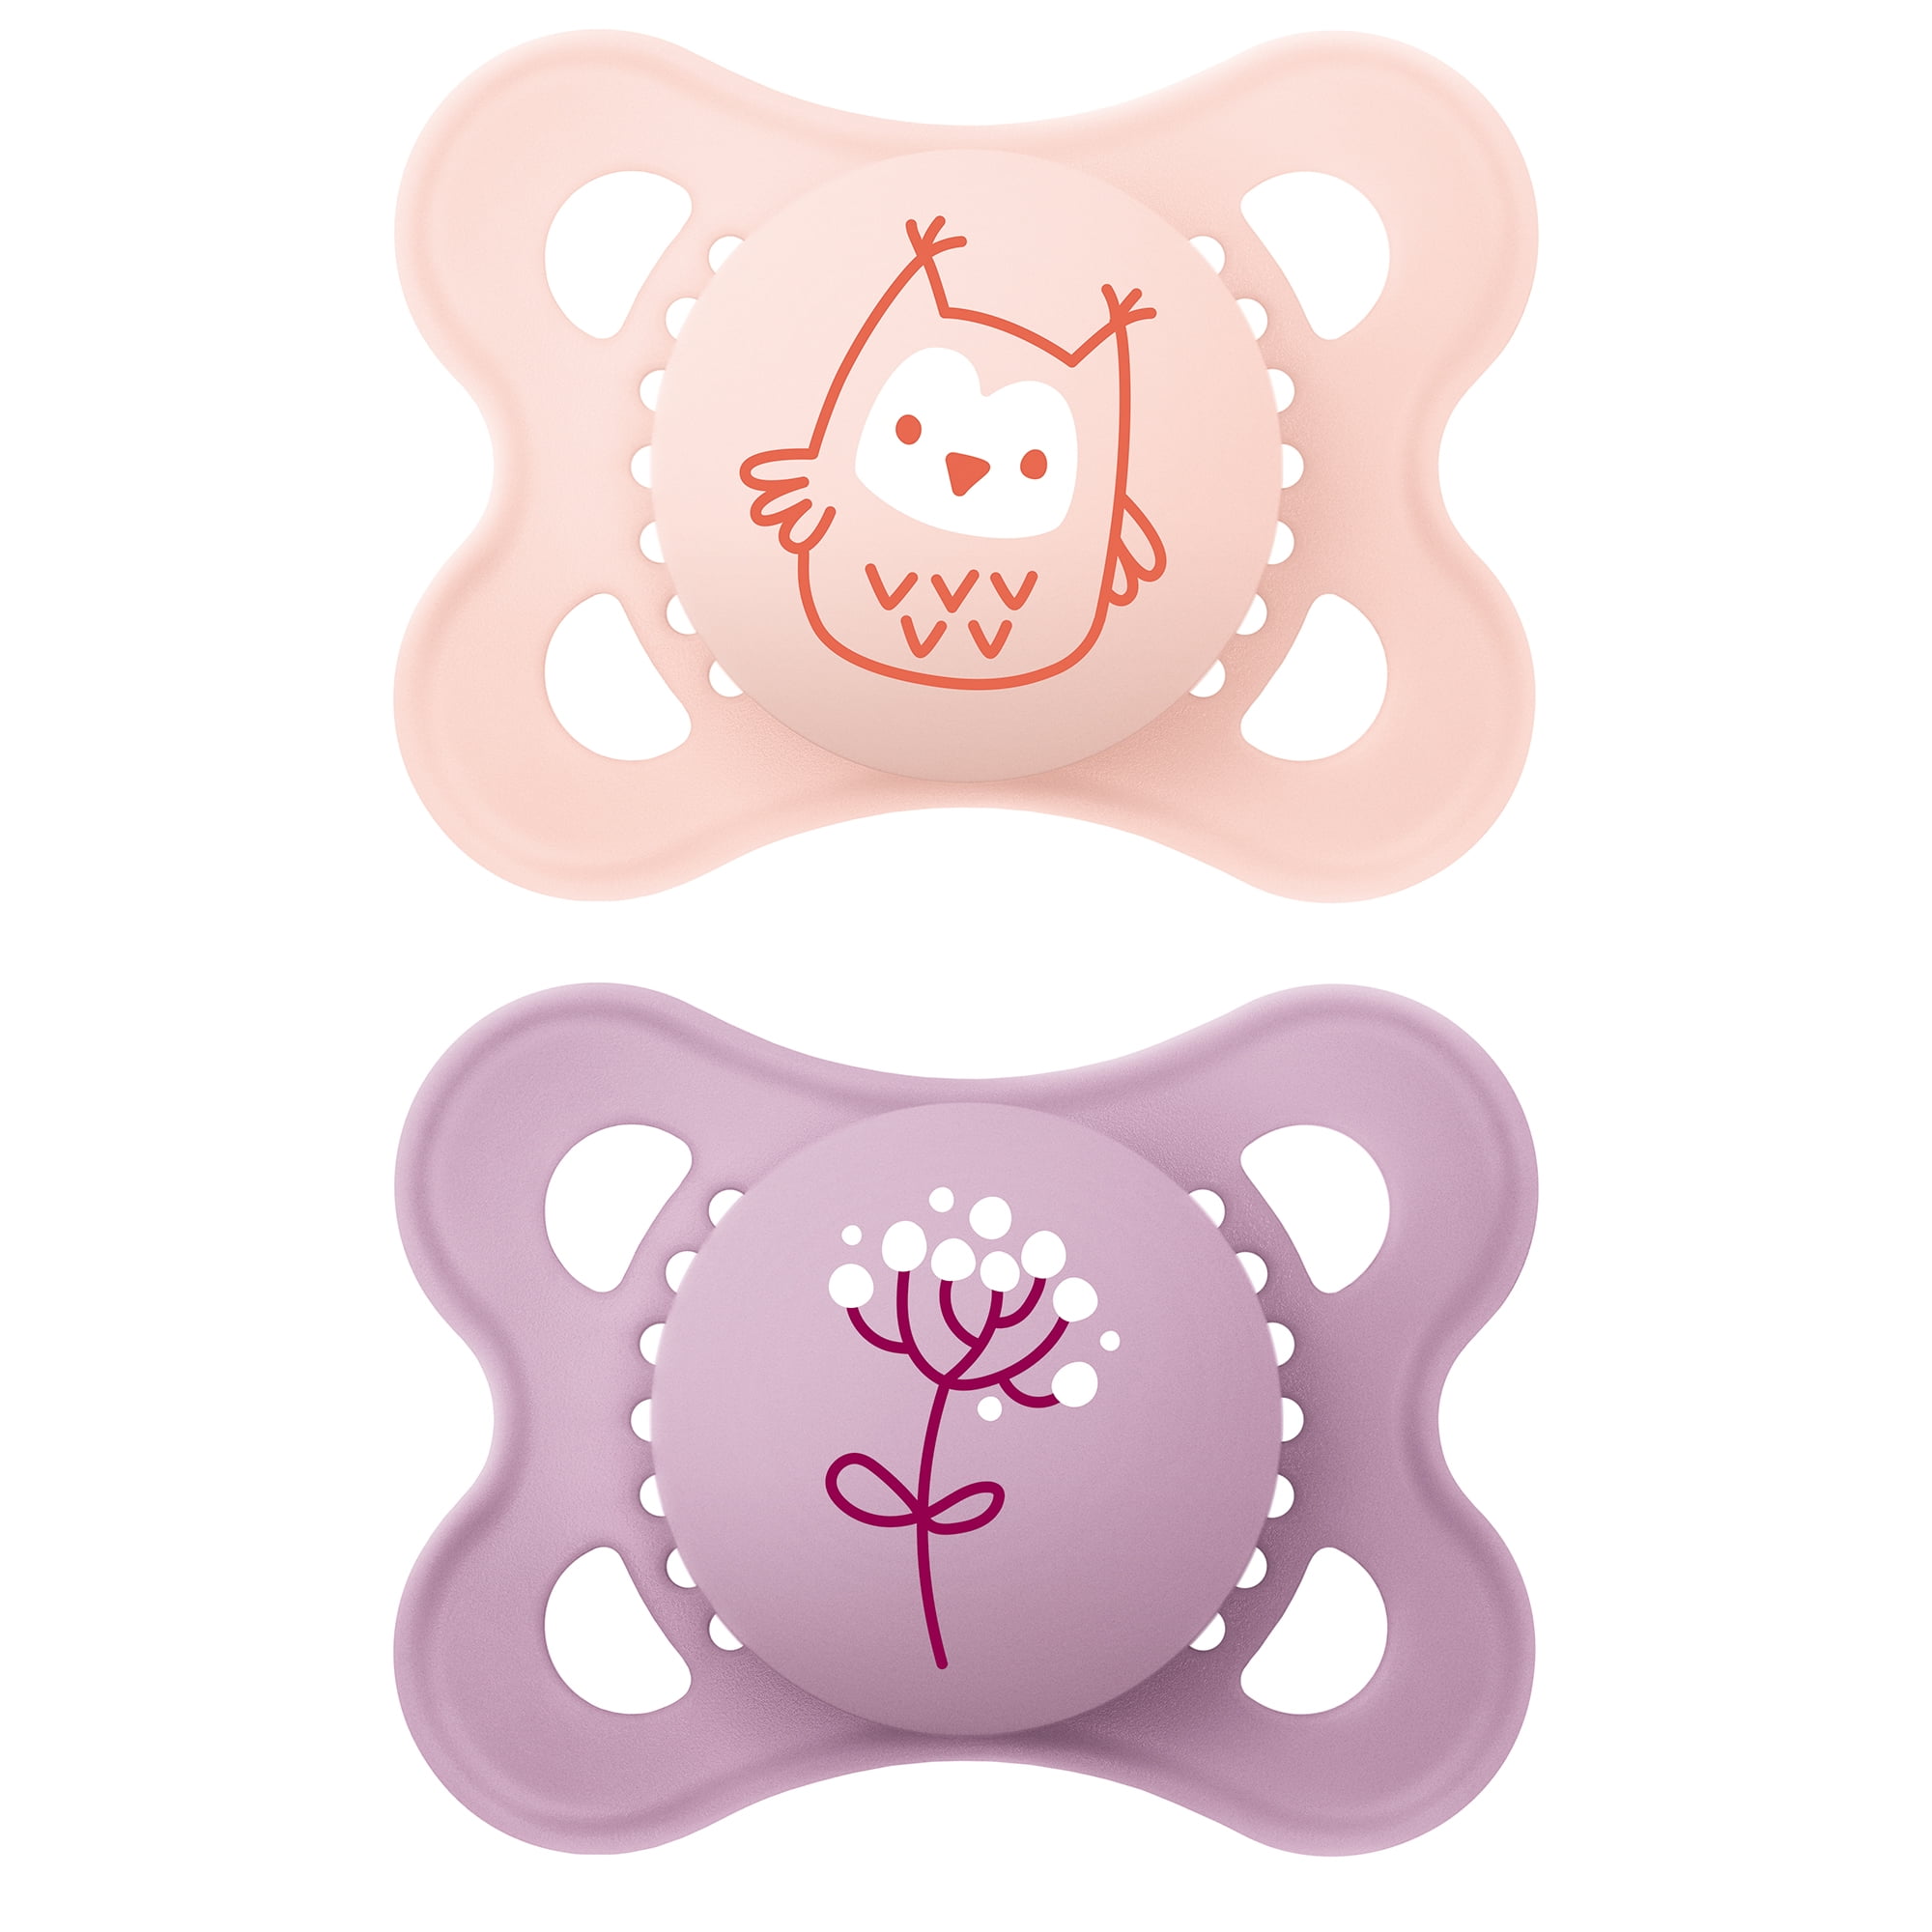 Design may Vary Months Soother Available in Pink or Blue MAM Original 6 